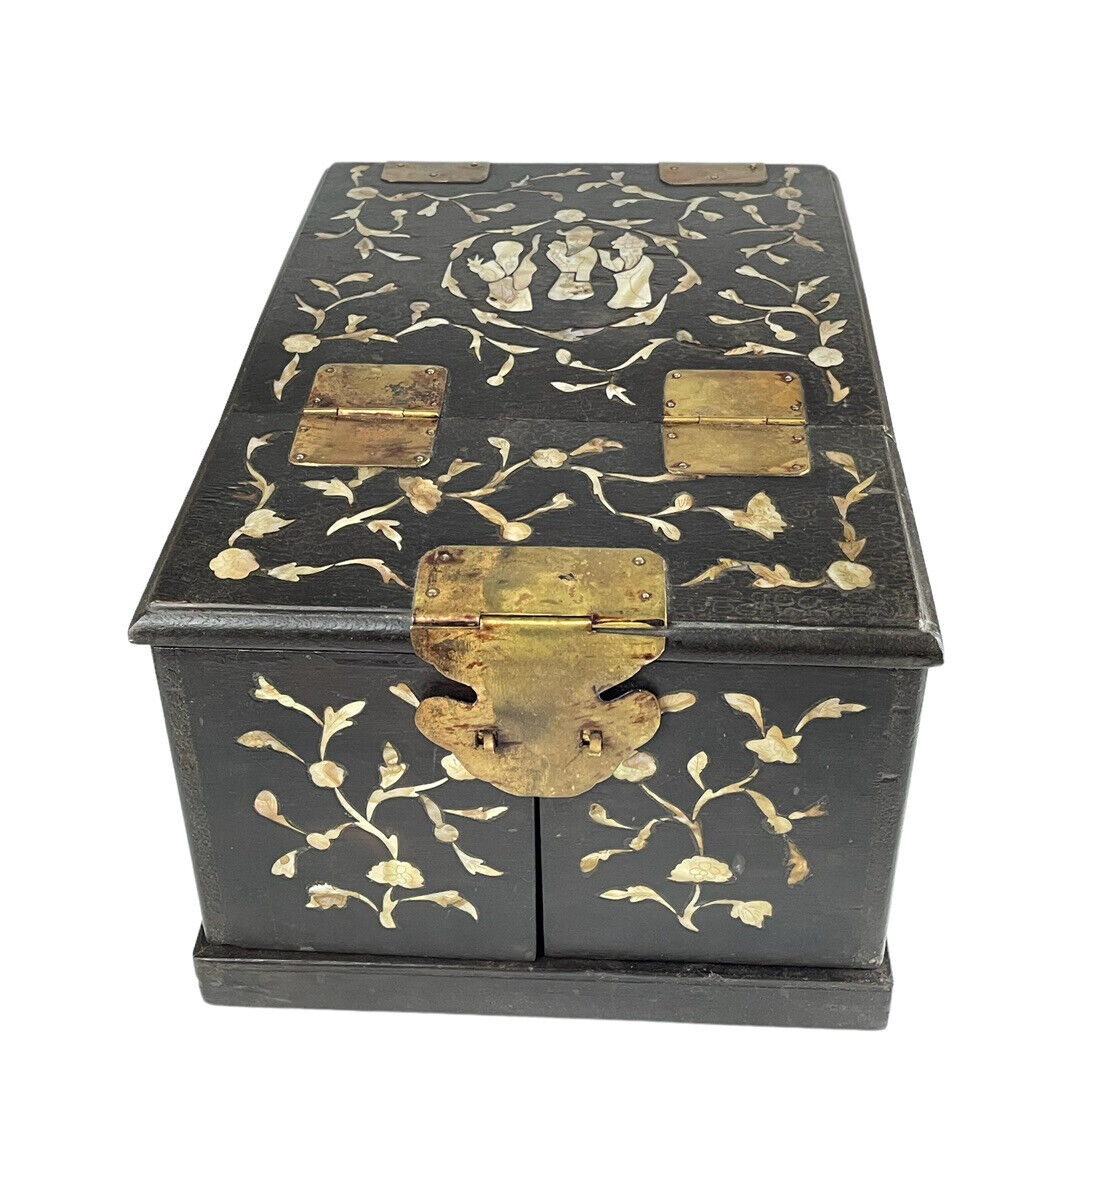 Vintage Asian Handmade Wooden Vanity Box With Inlaid Pearl